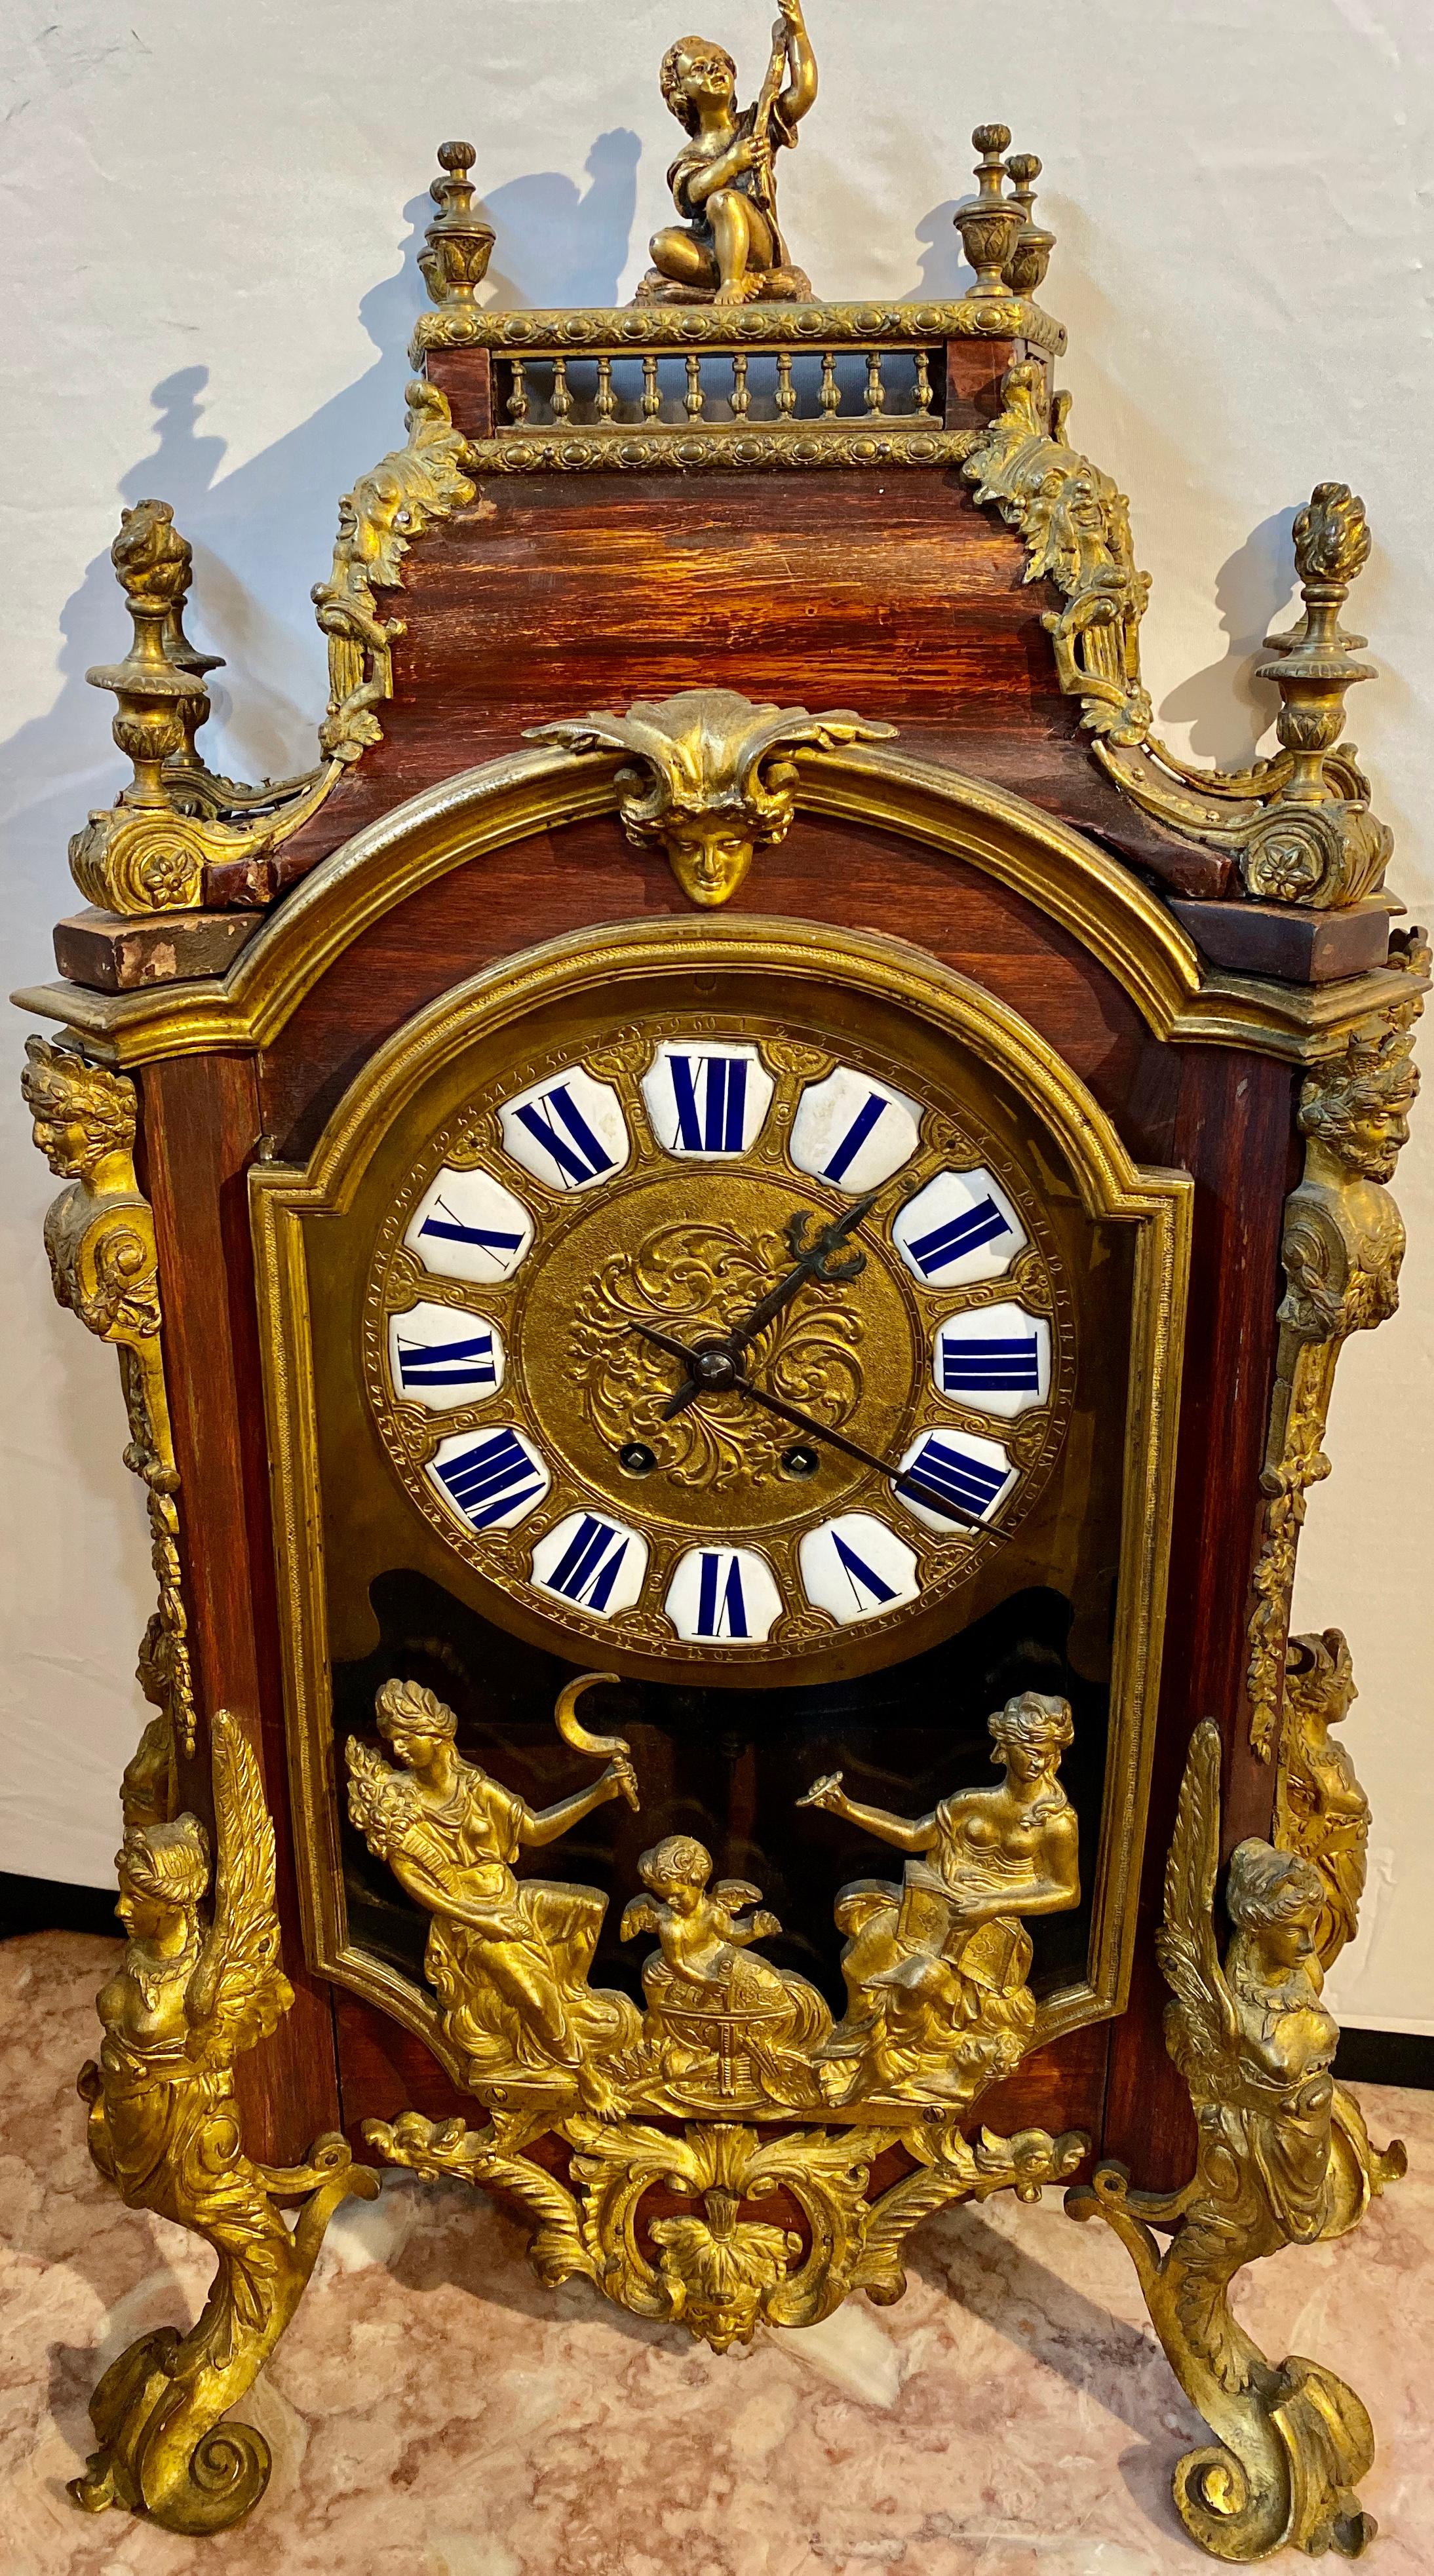 19th century bronze mounted mantel or desk clock figural. This fine working walnut clock is a must have for anyone looking to make a statement. The gilt metal or bronze mounts having multiple design such as female busts, ball and claw feet, satyr